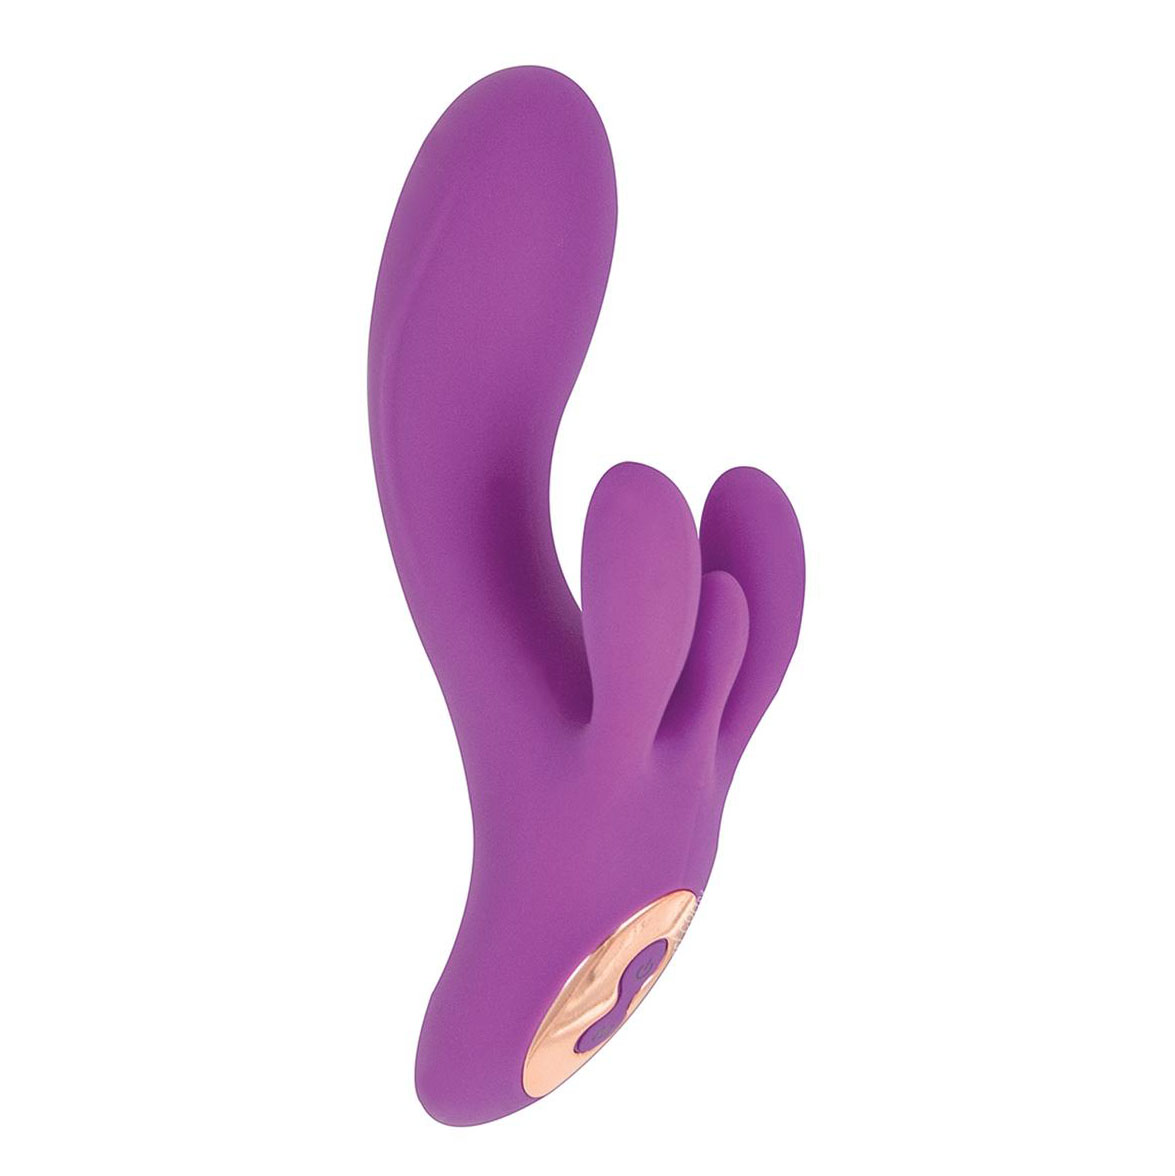 Vibes Of New York Triple Tickler Massager Vibrators With Clit Stims